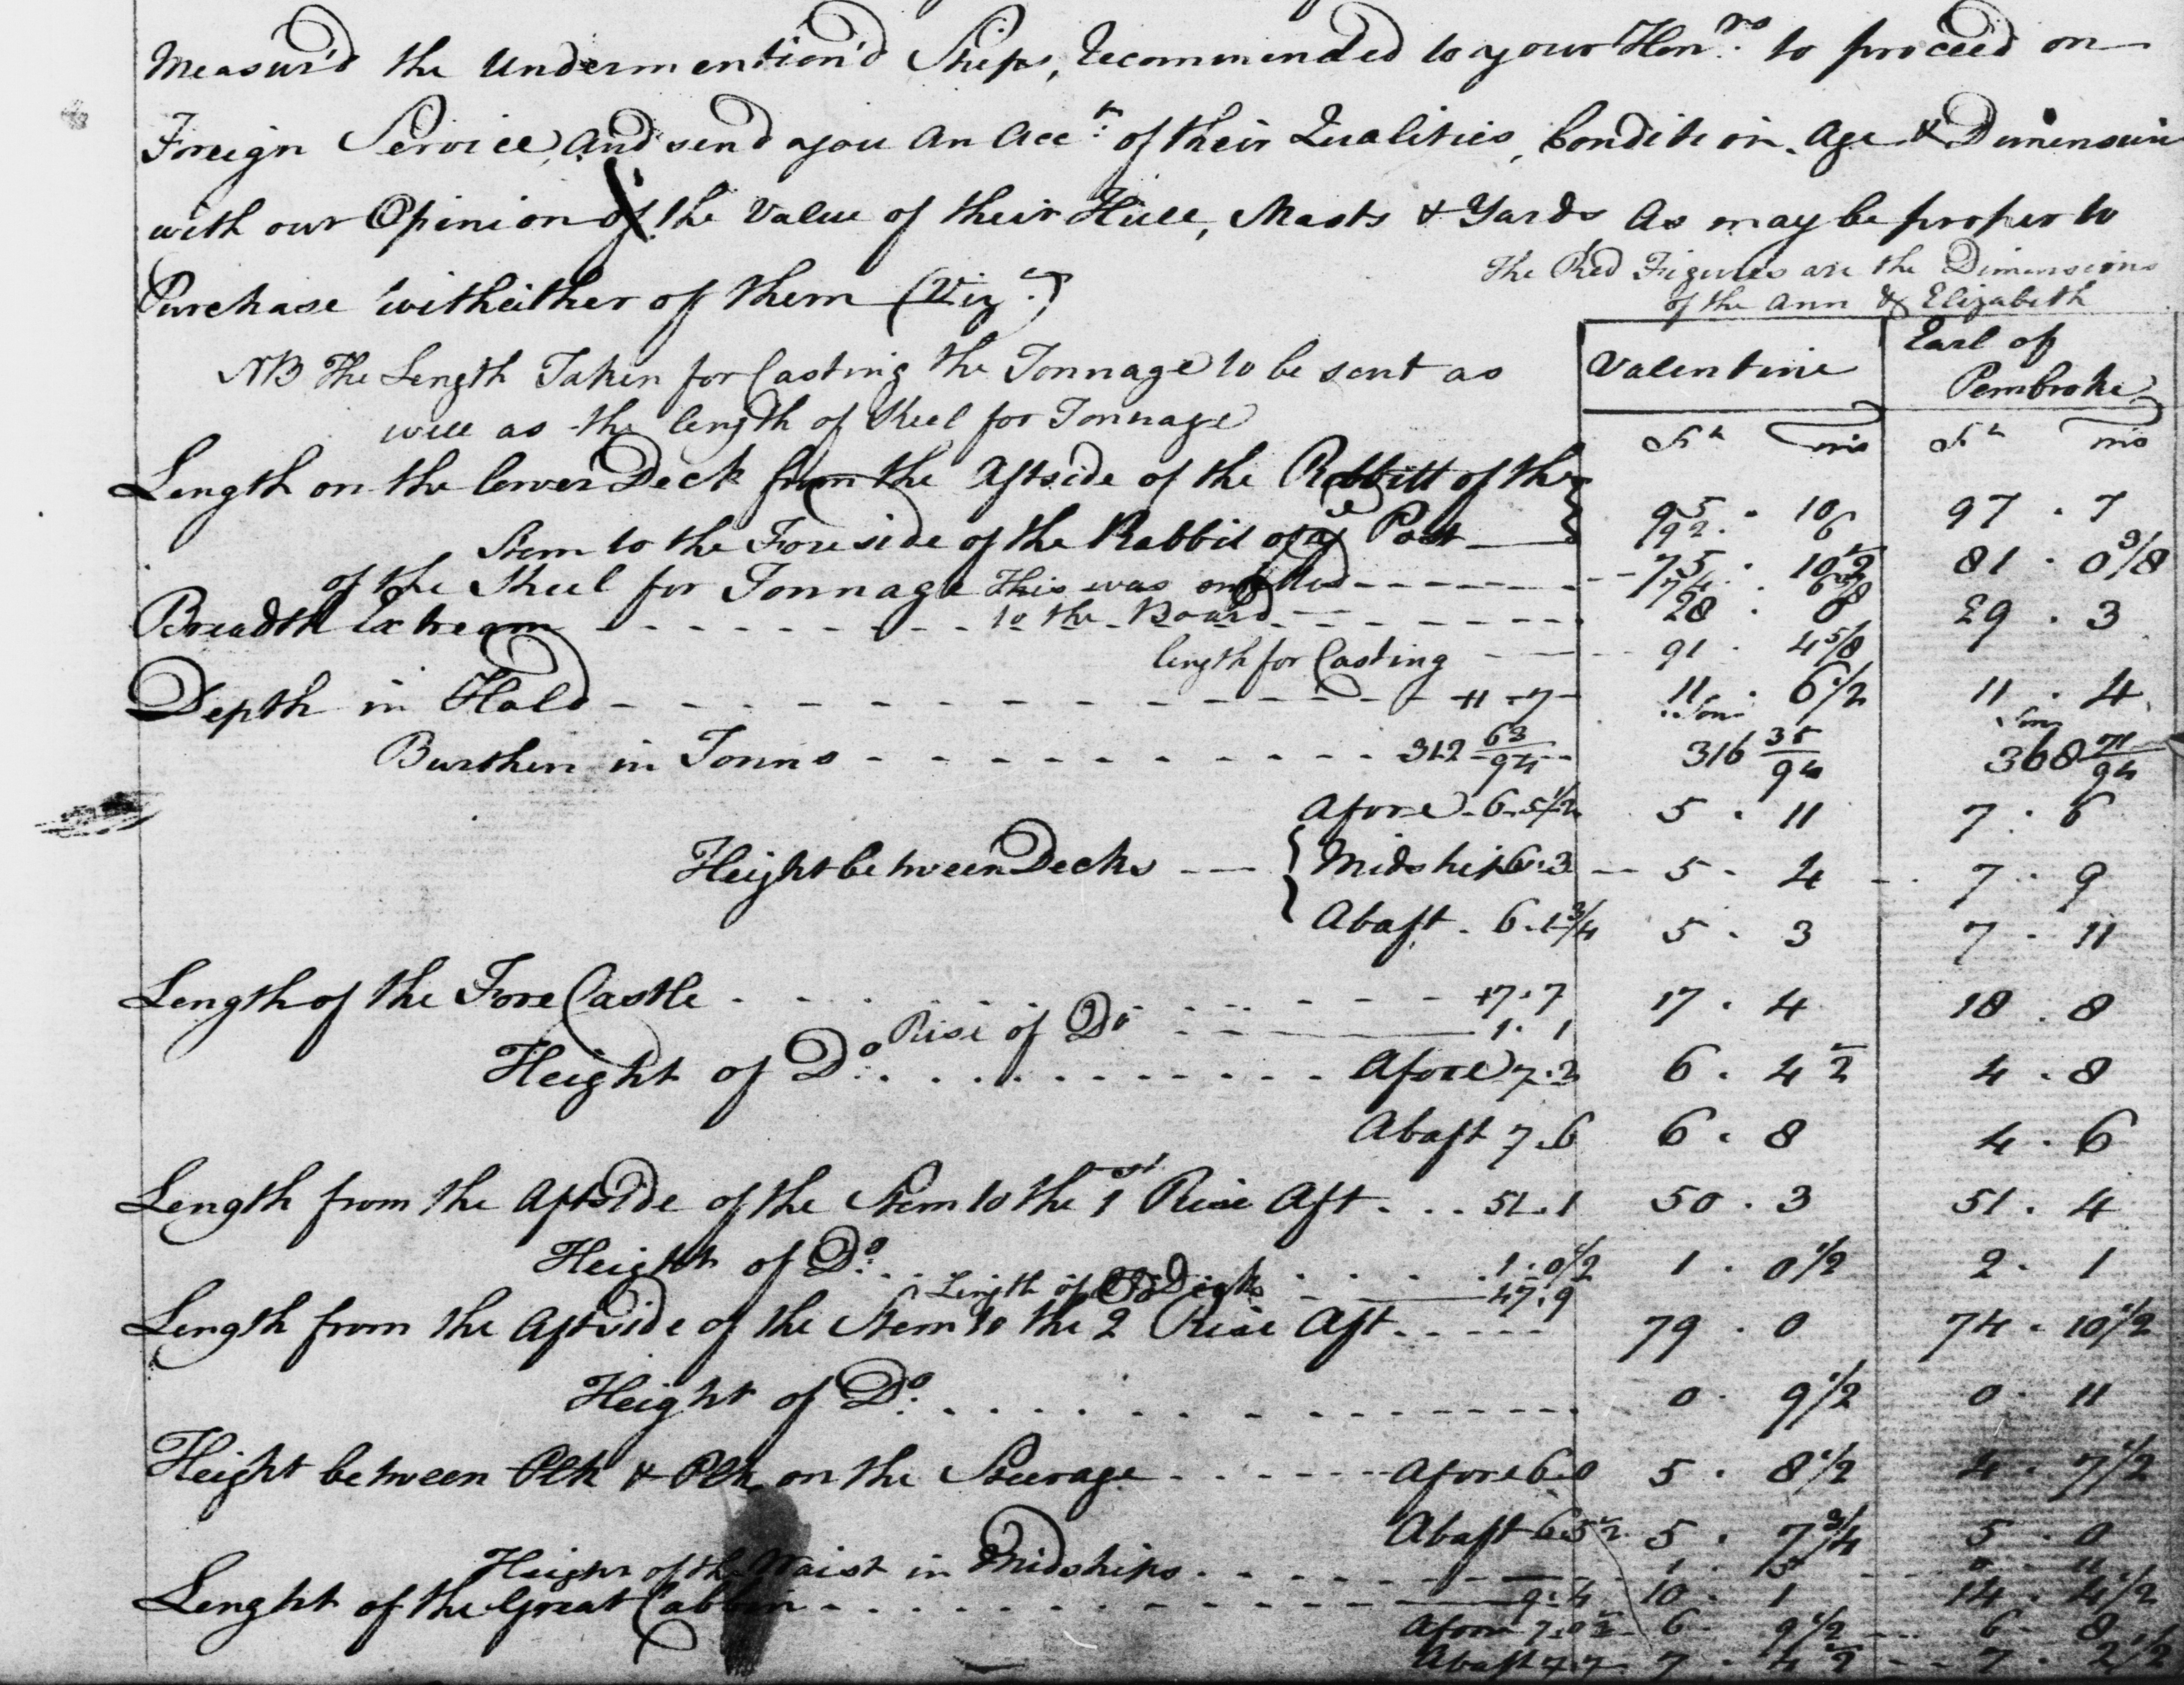 A handwritten report outlining the condition, dimensions and estimated value of the Earl of Pembroke 